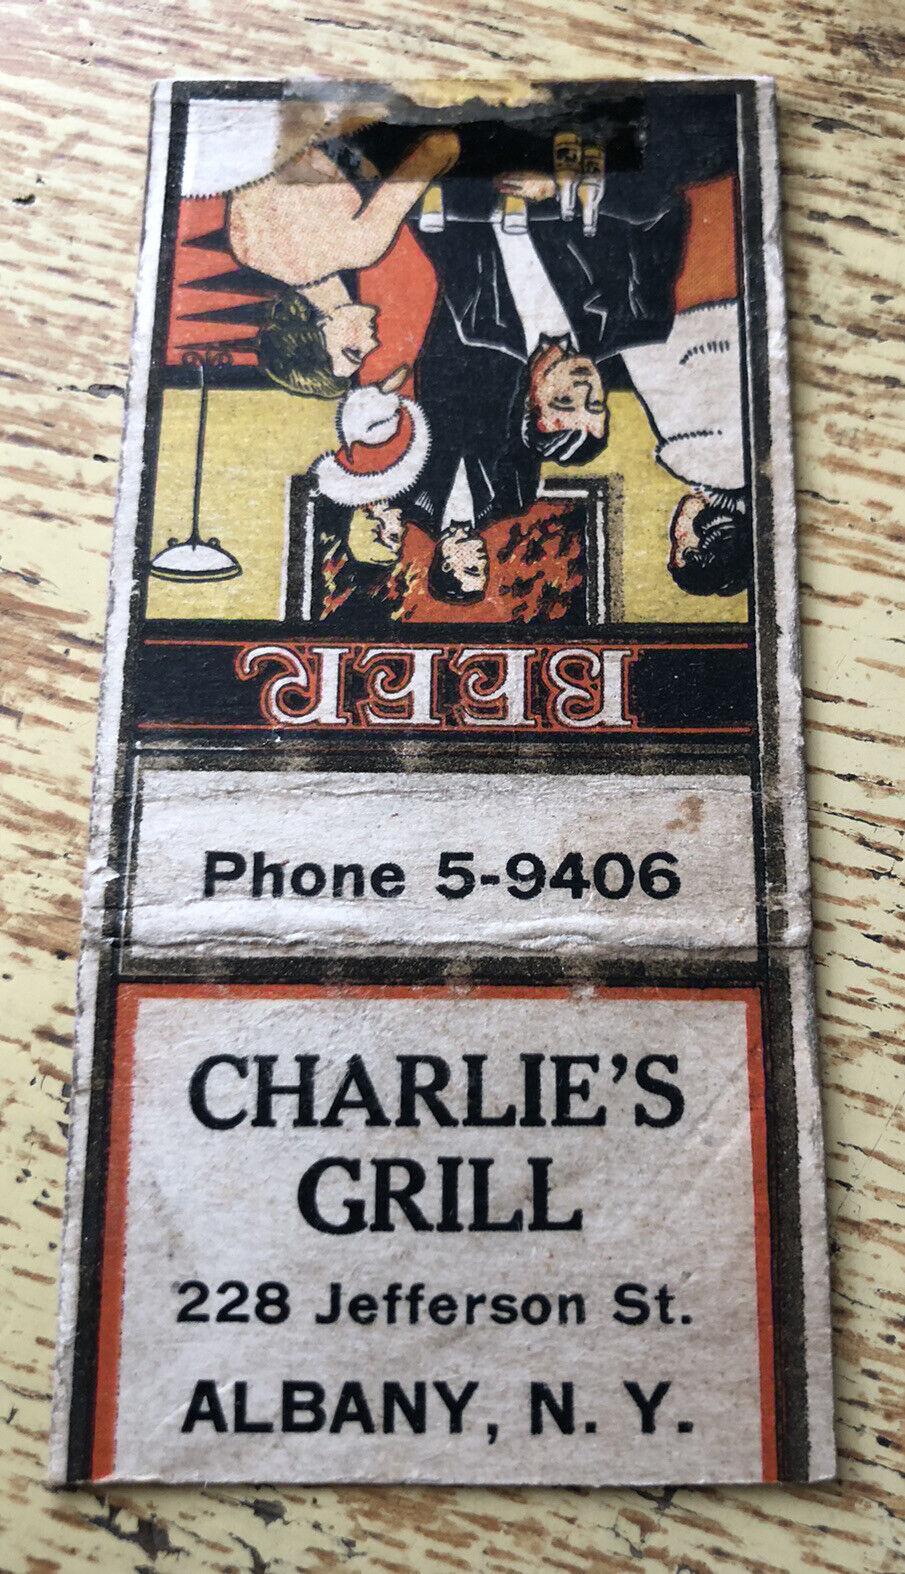 1940s Charlie’s Grill Restaurant Albany New York Matchbook Cover Beer